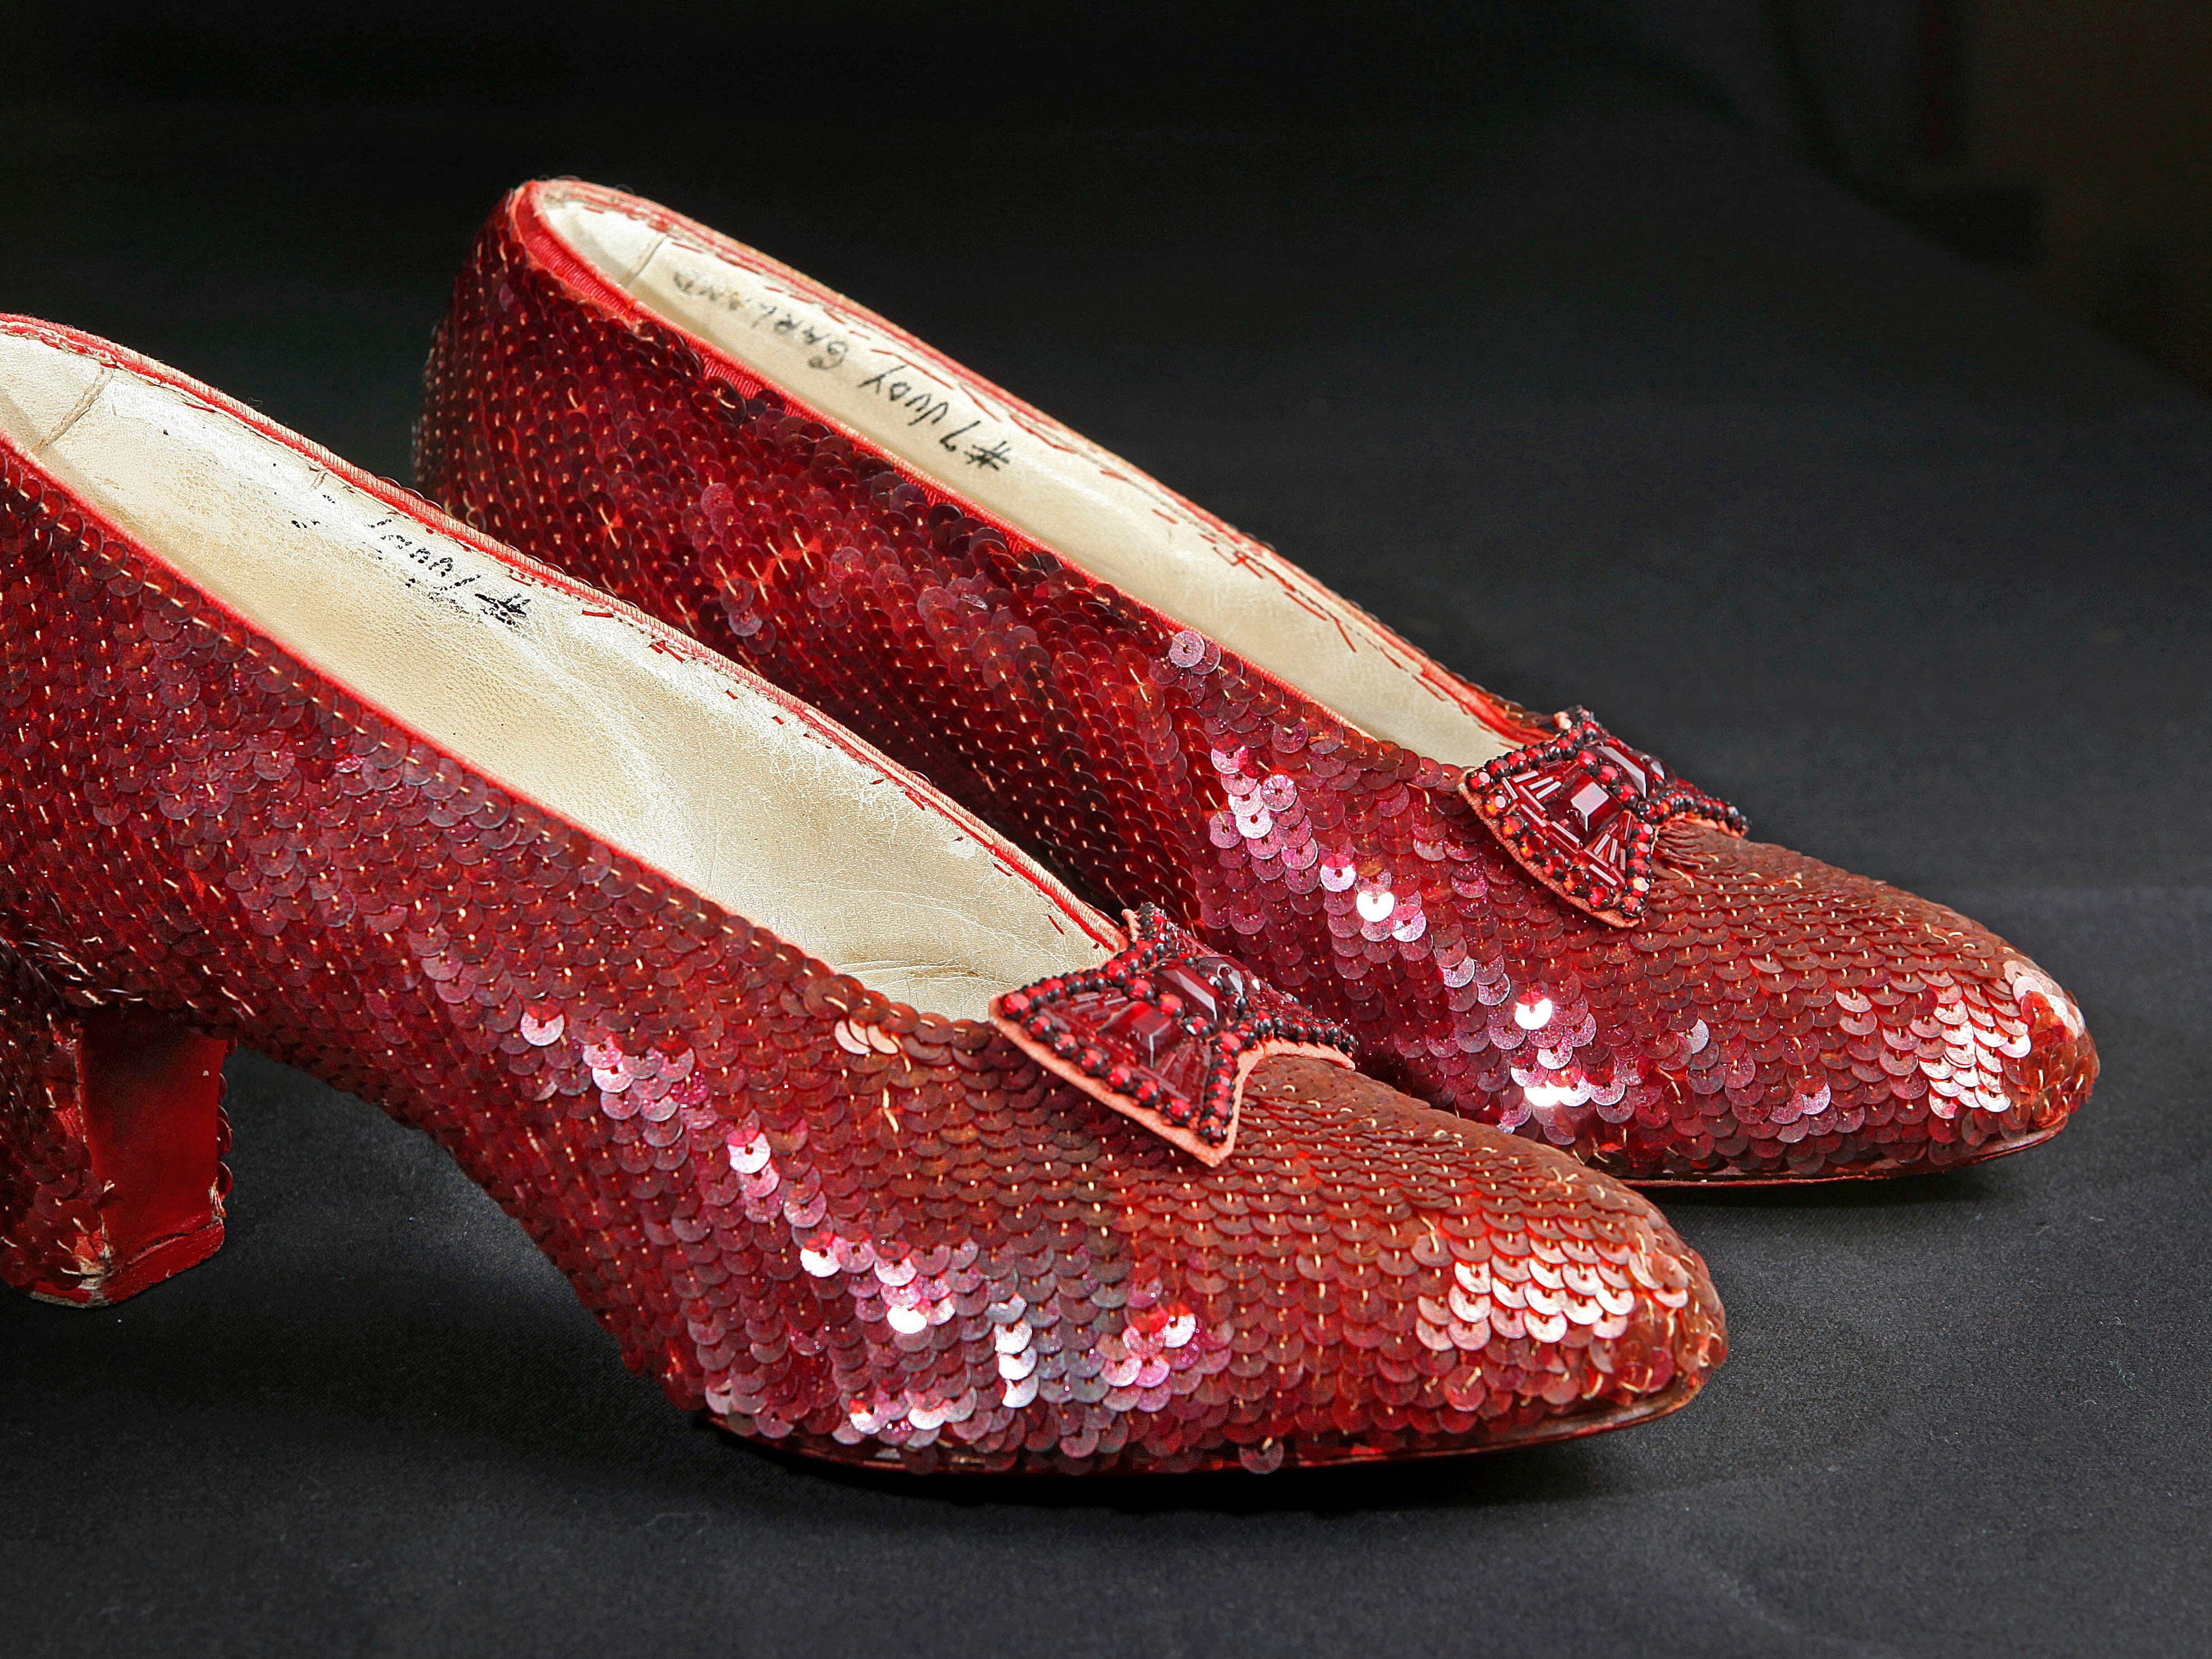 Dying thief who stole Wizard Of Oz ruby slippers from US museum avoids prison